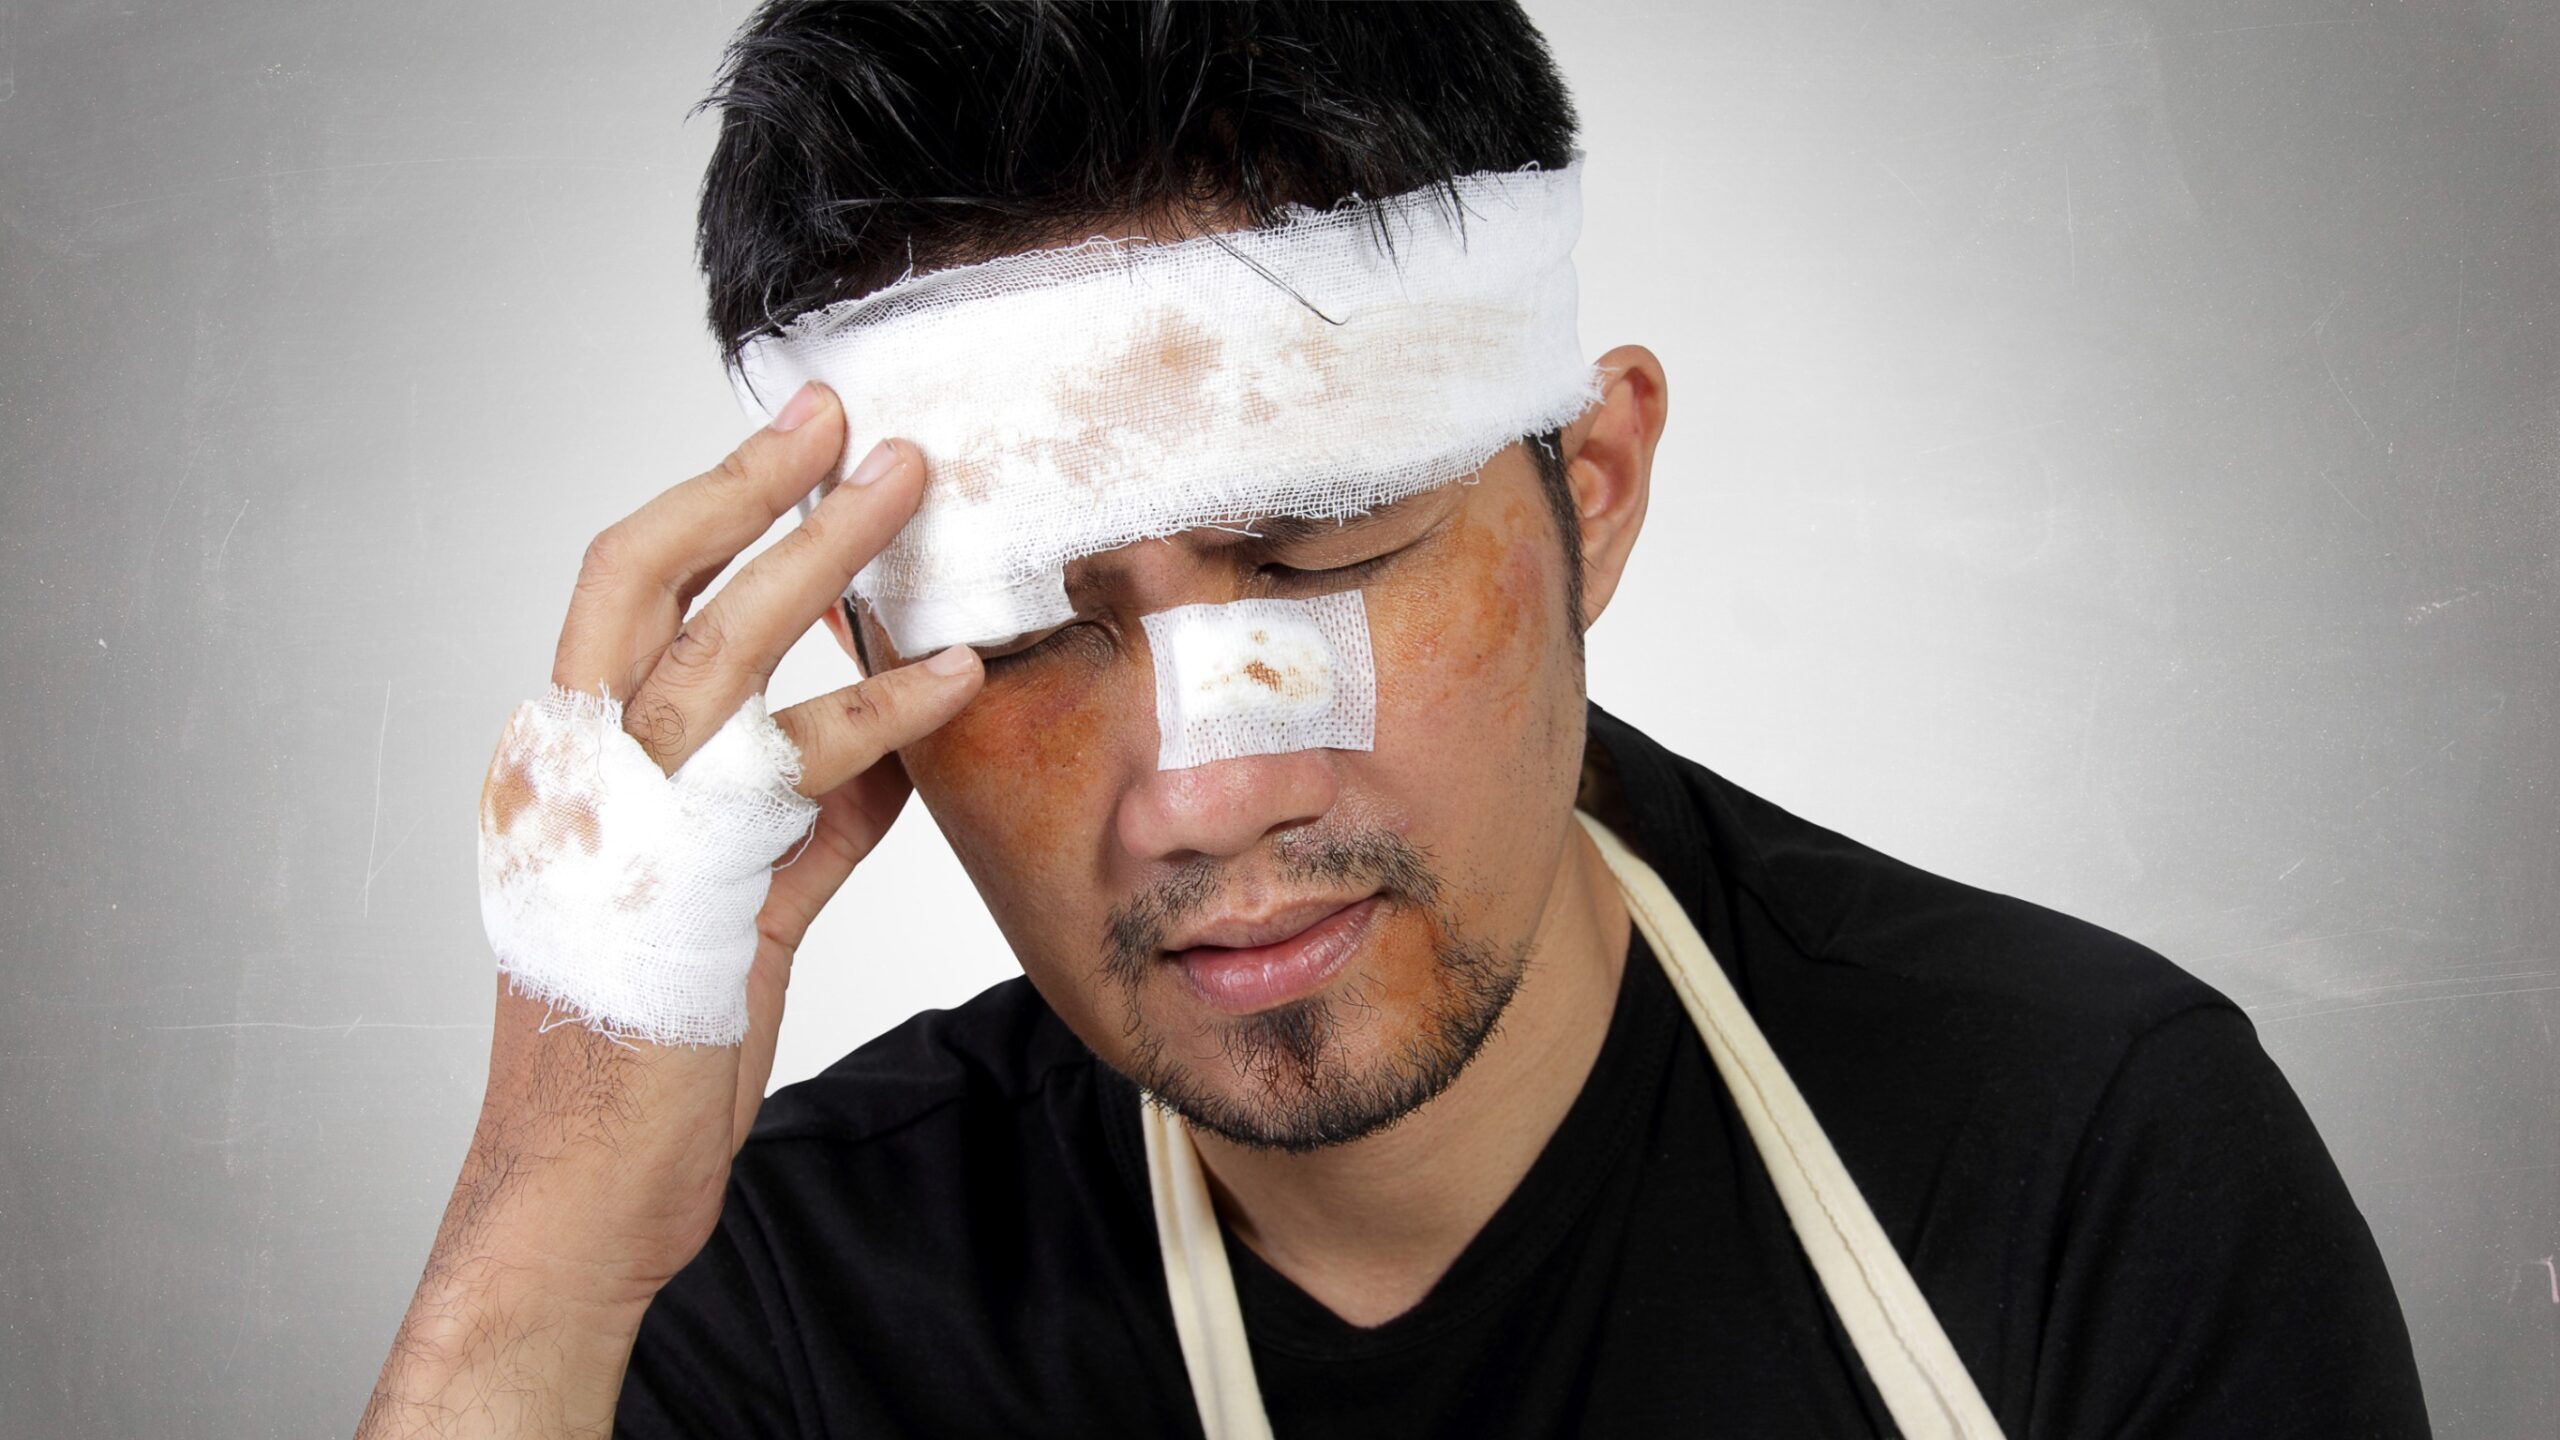 Man With Bandaged Wounds On His Face.